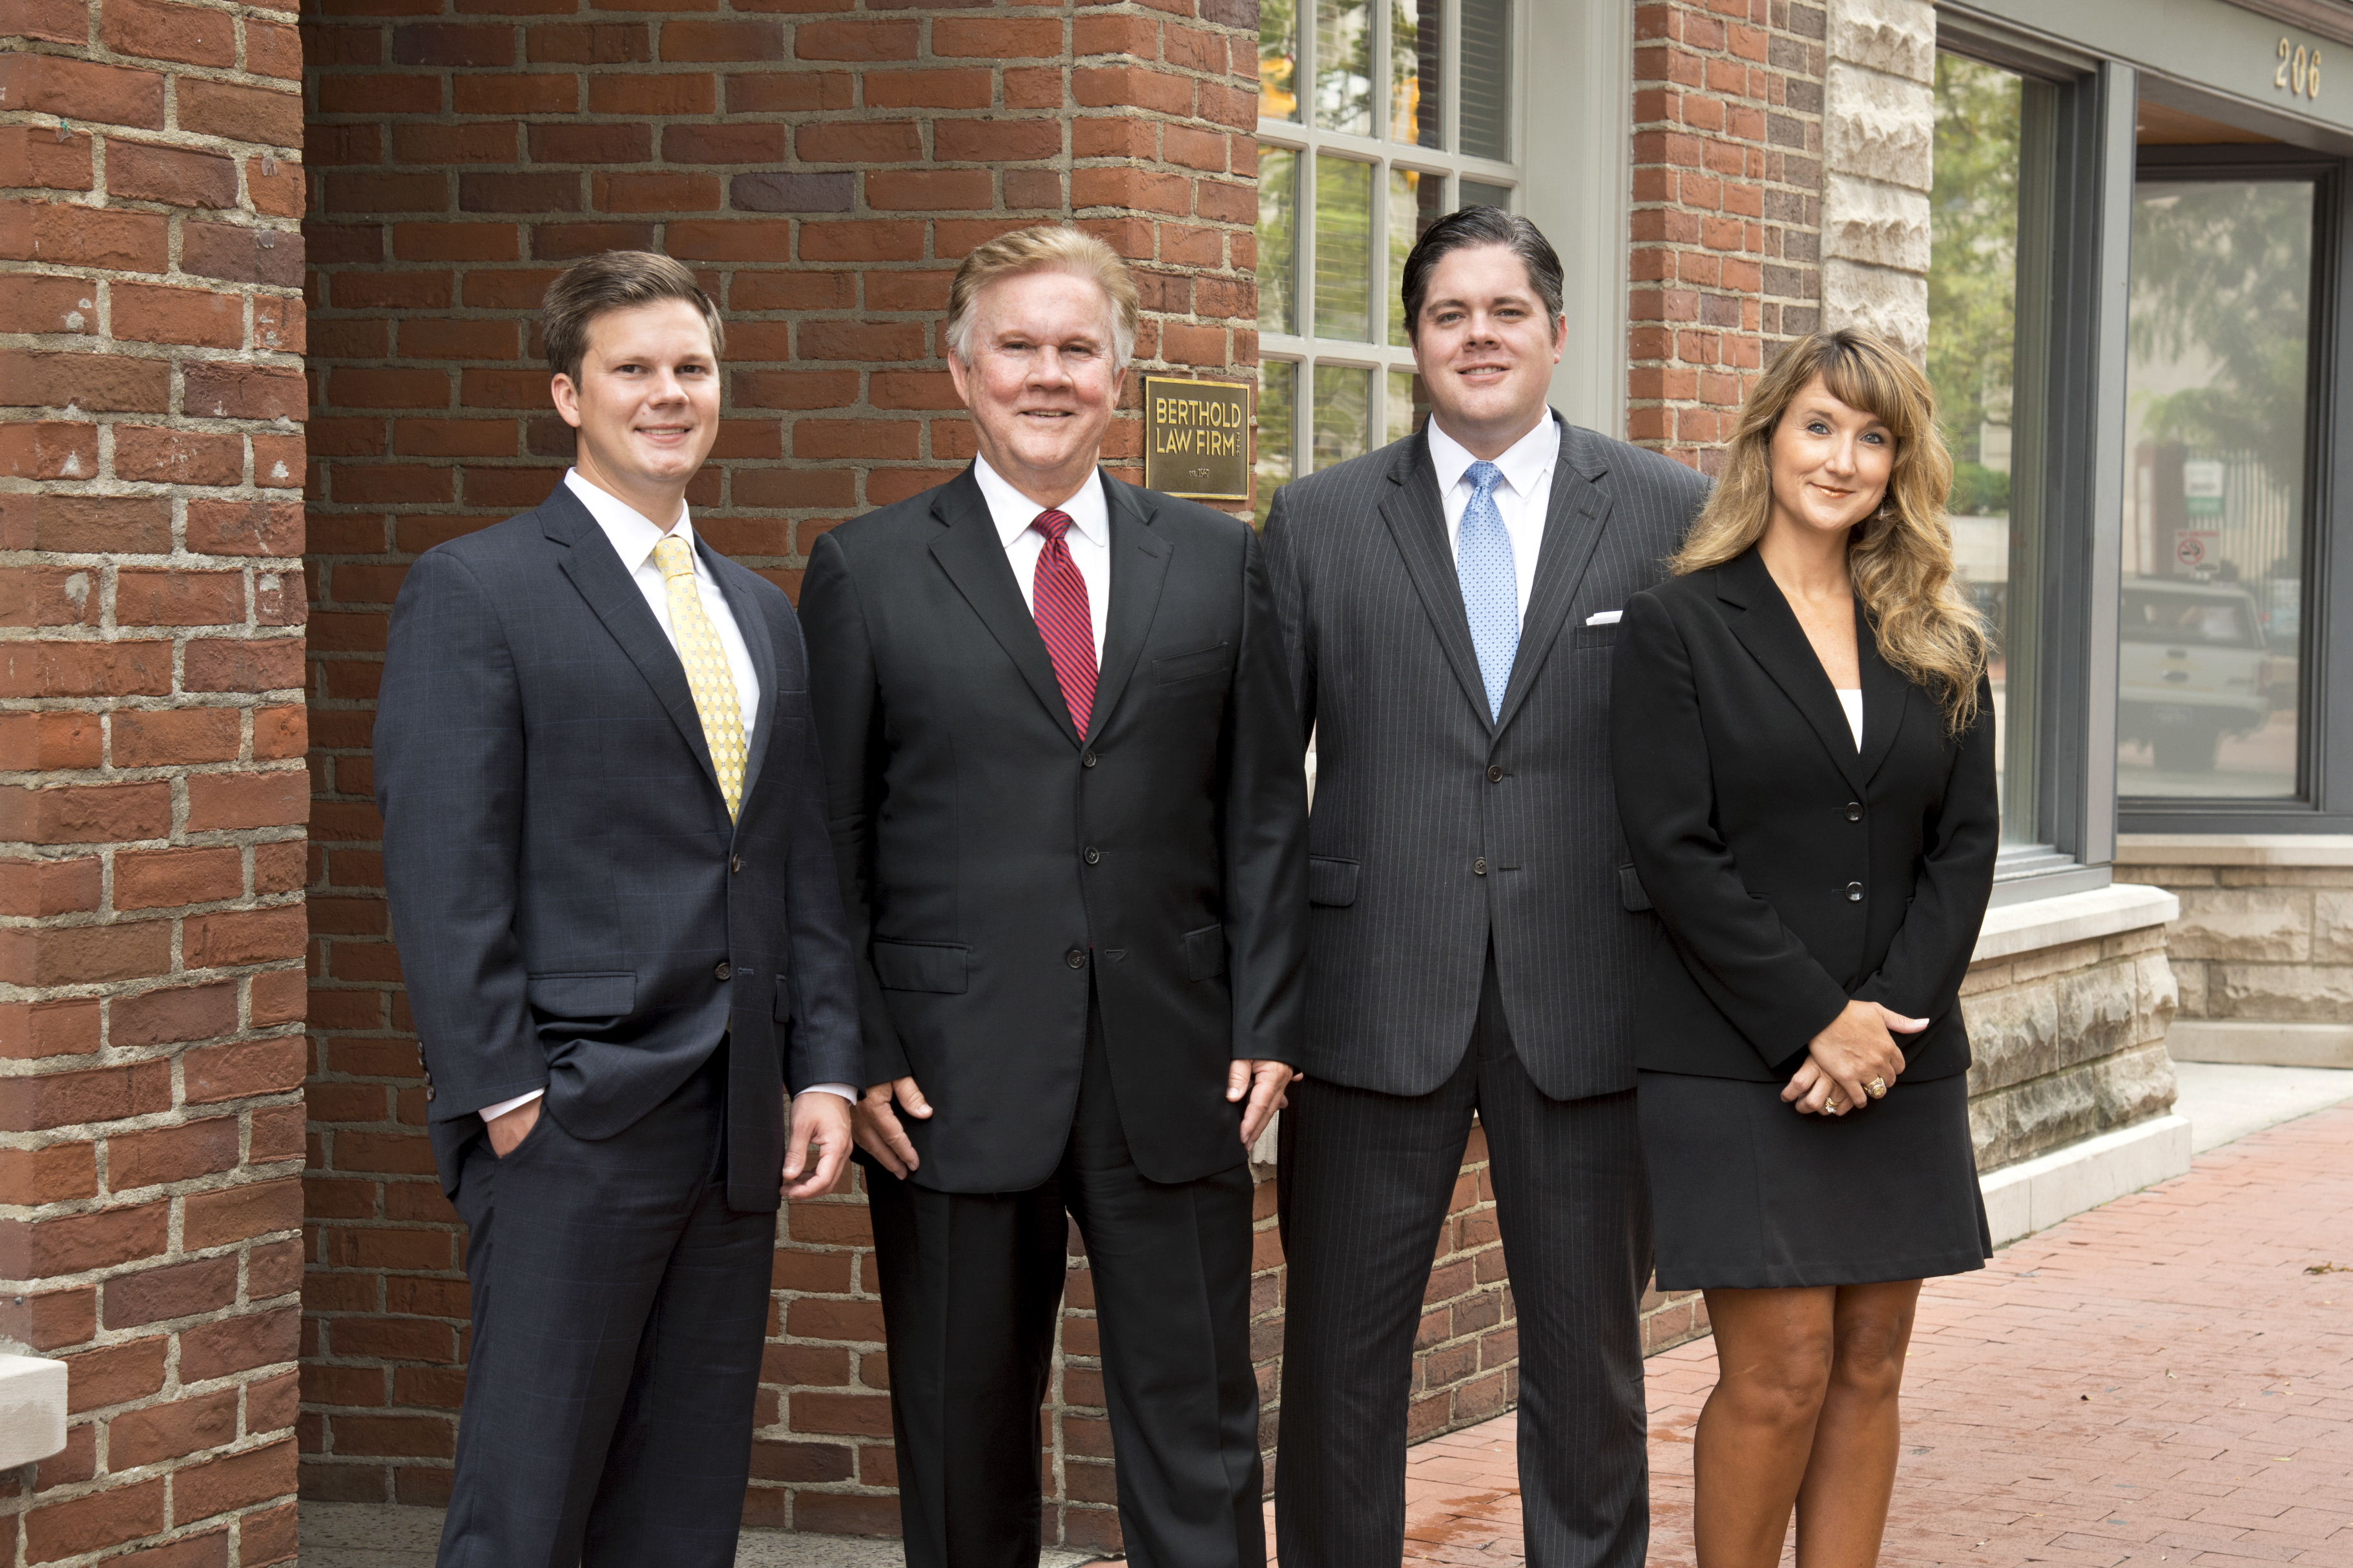 Meet the team of West Virginia personal injury lawyers at Berthold Law Firm.